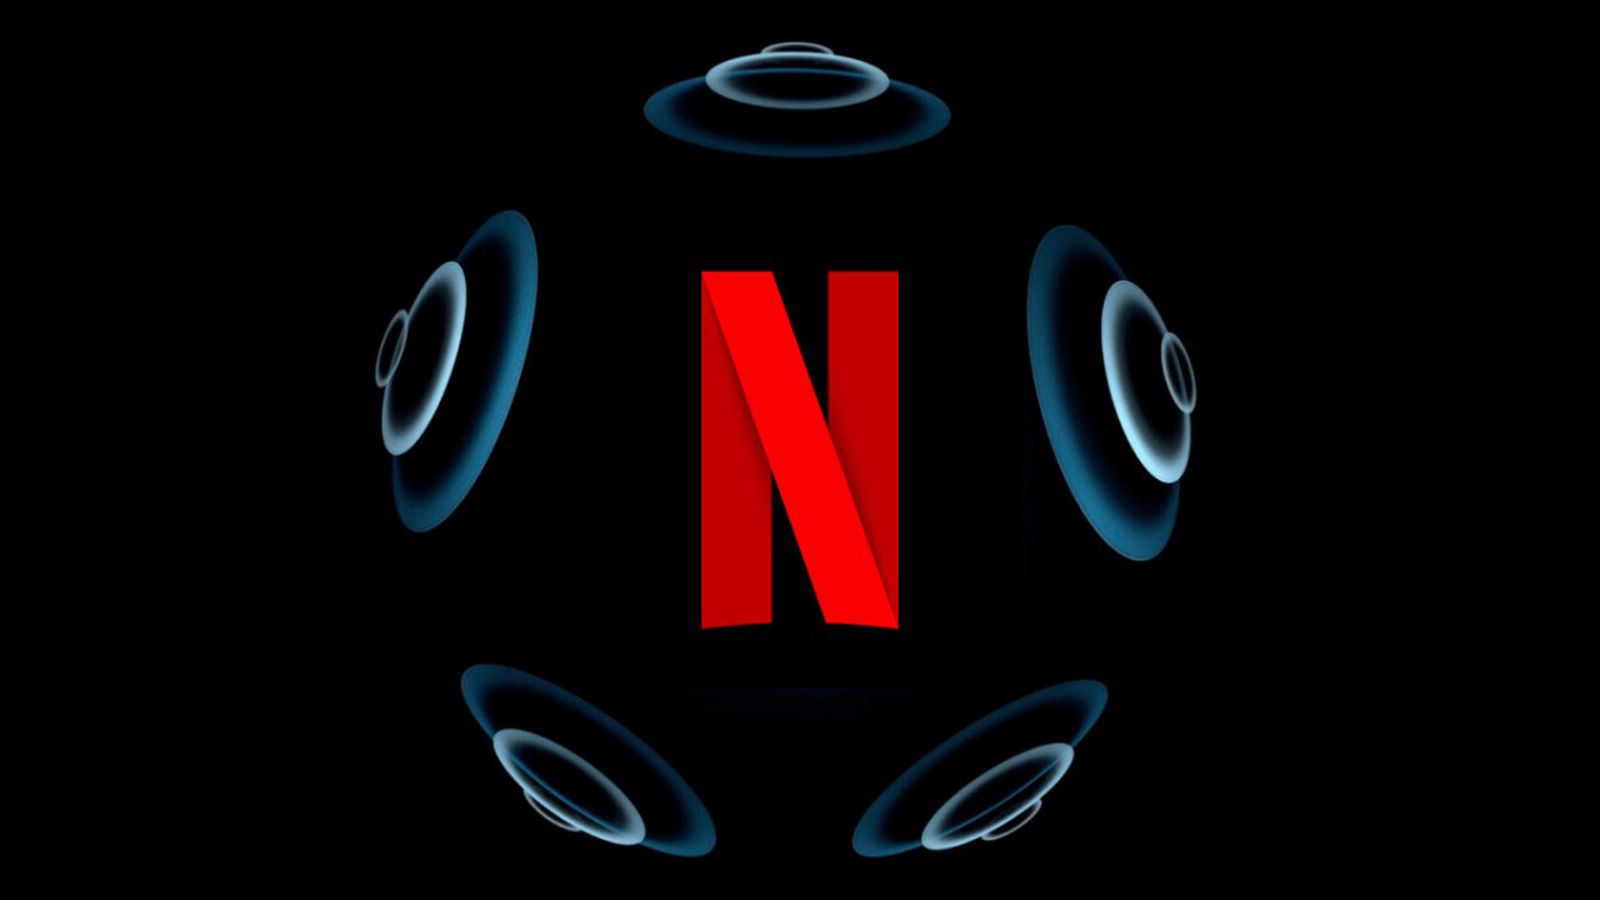 Netflix says it is not testing space audio support for AirPods